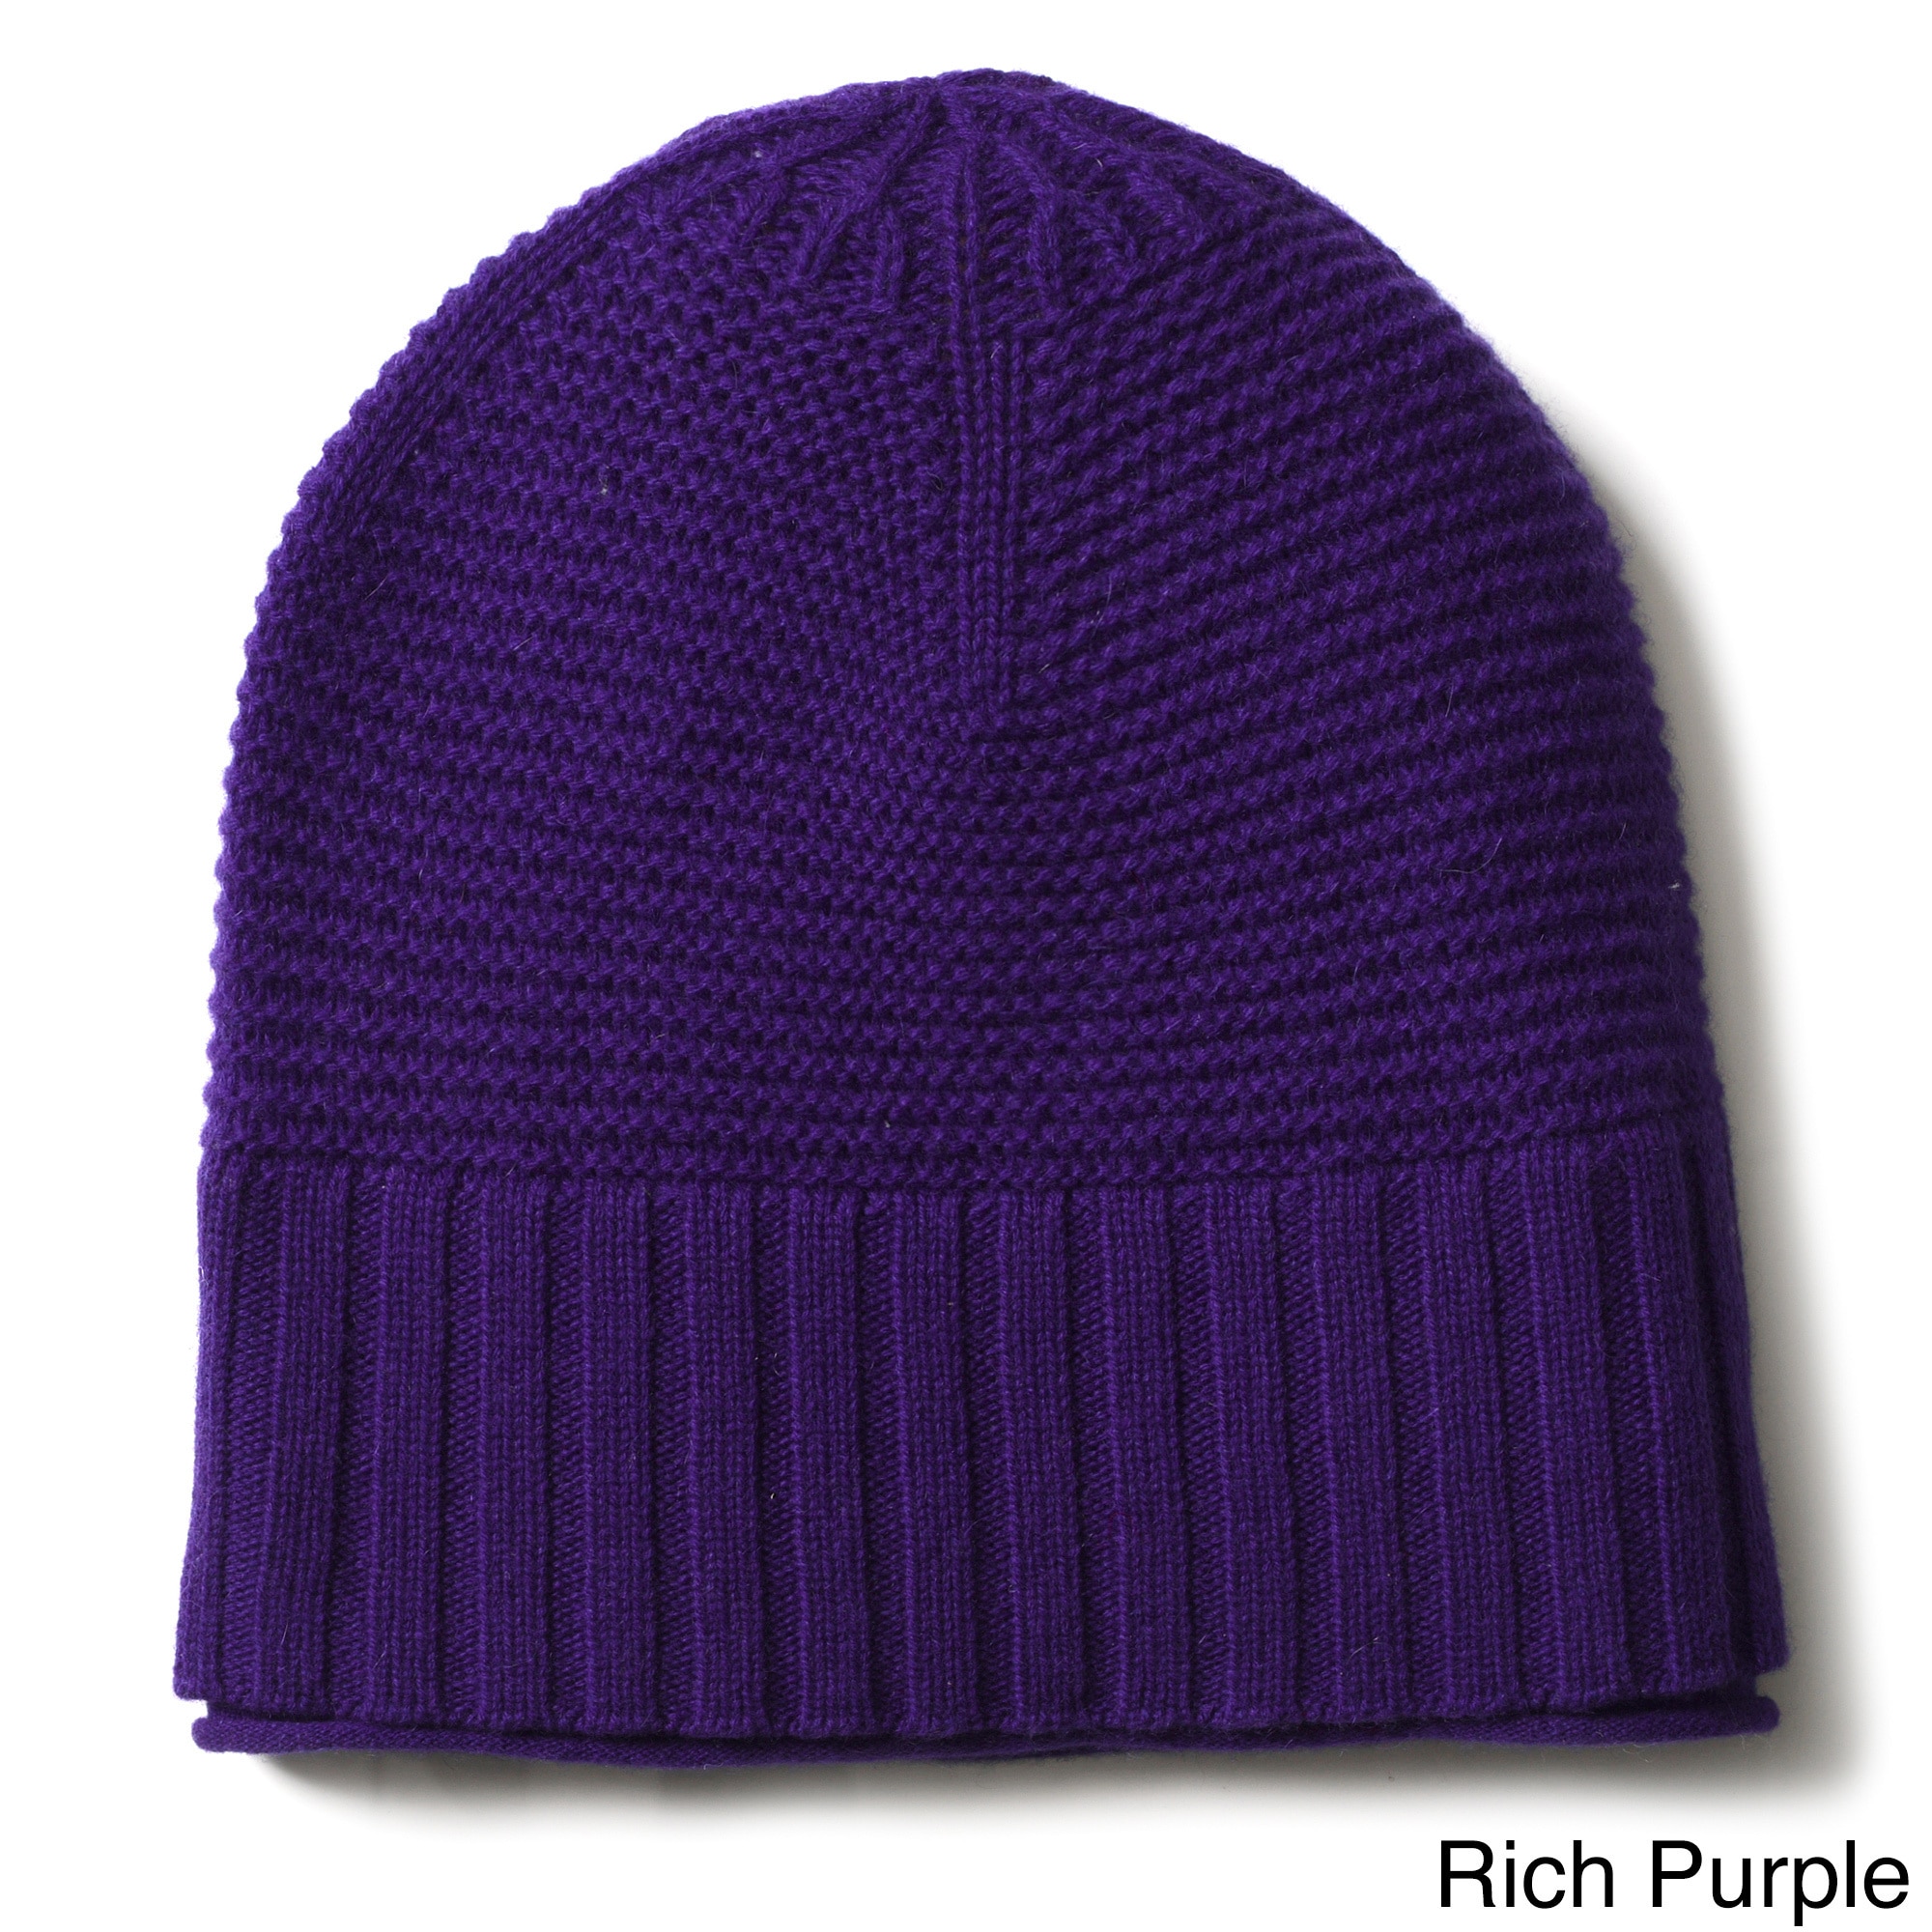 Ply Cashmere Ply Cashmere Ribbed Hat Purple Size One Size Fits Most